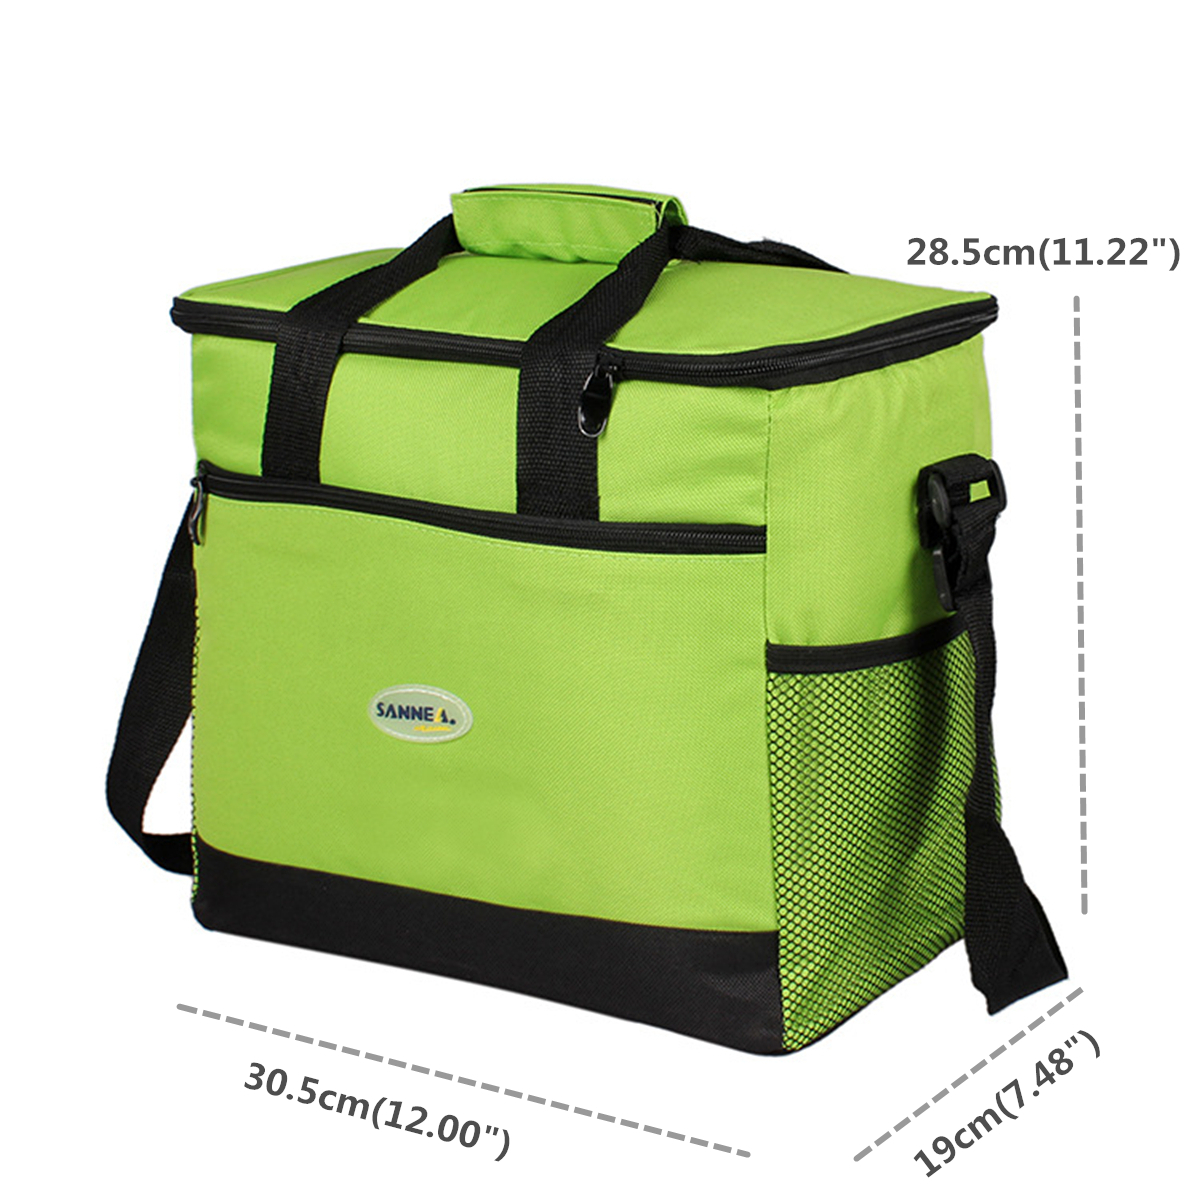 Large-Insulated-Cooler-Cool-Bag-Outdoor-Camping-Picnic-Lunch-Shoulder-Hand-Bag-1186956-3